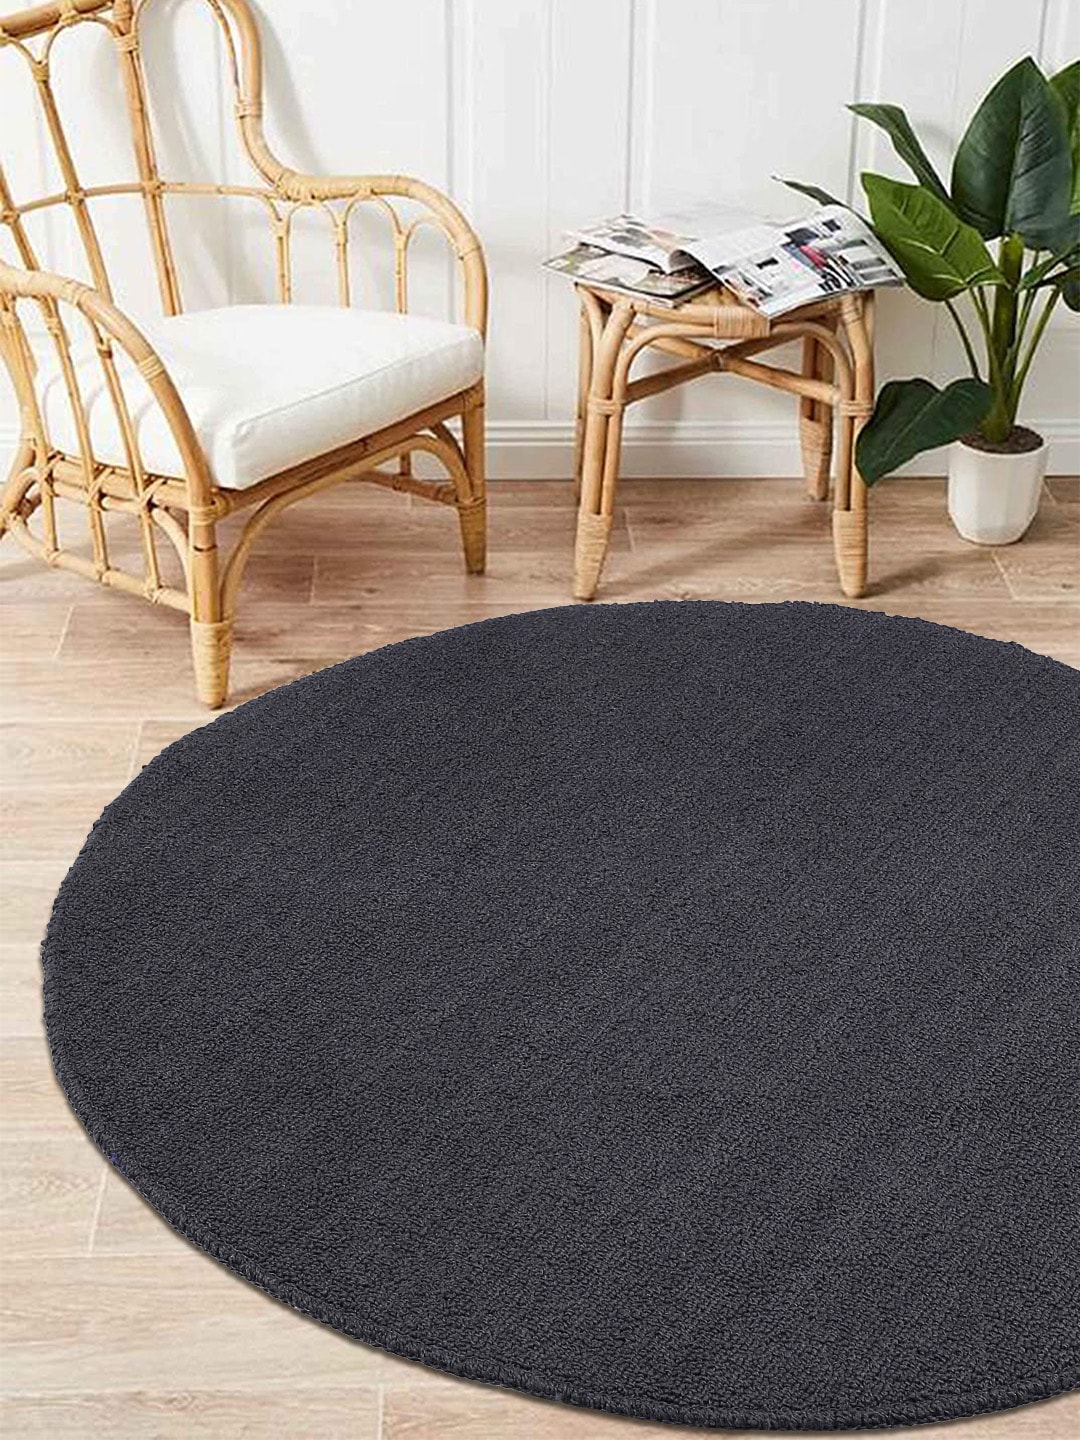 Saral Home Grey Solid PP-Yarn Round Anti-Skid Multi-Use Floor Mat Price in India